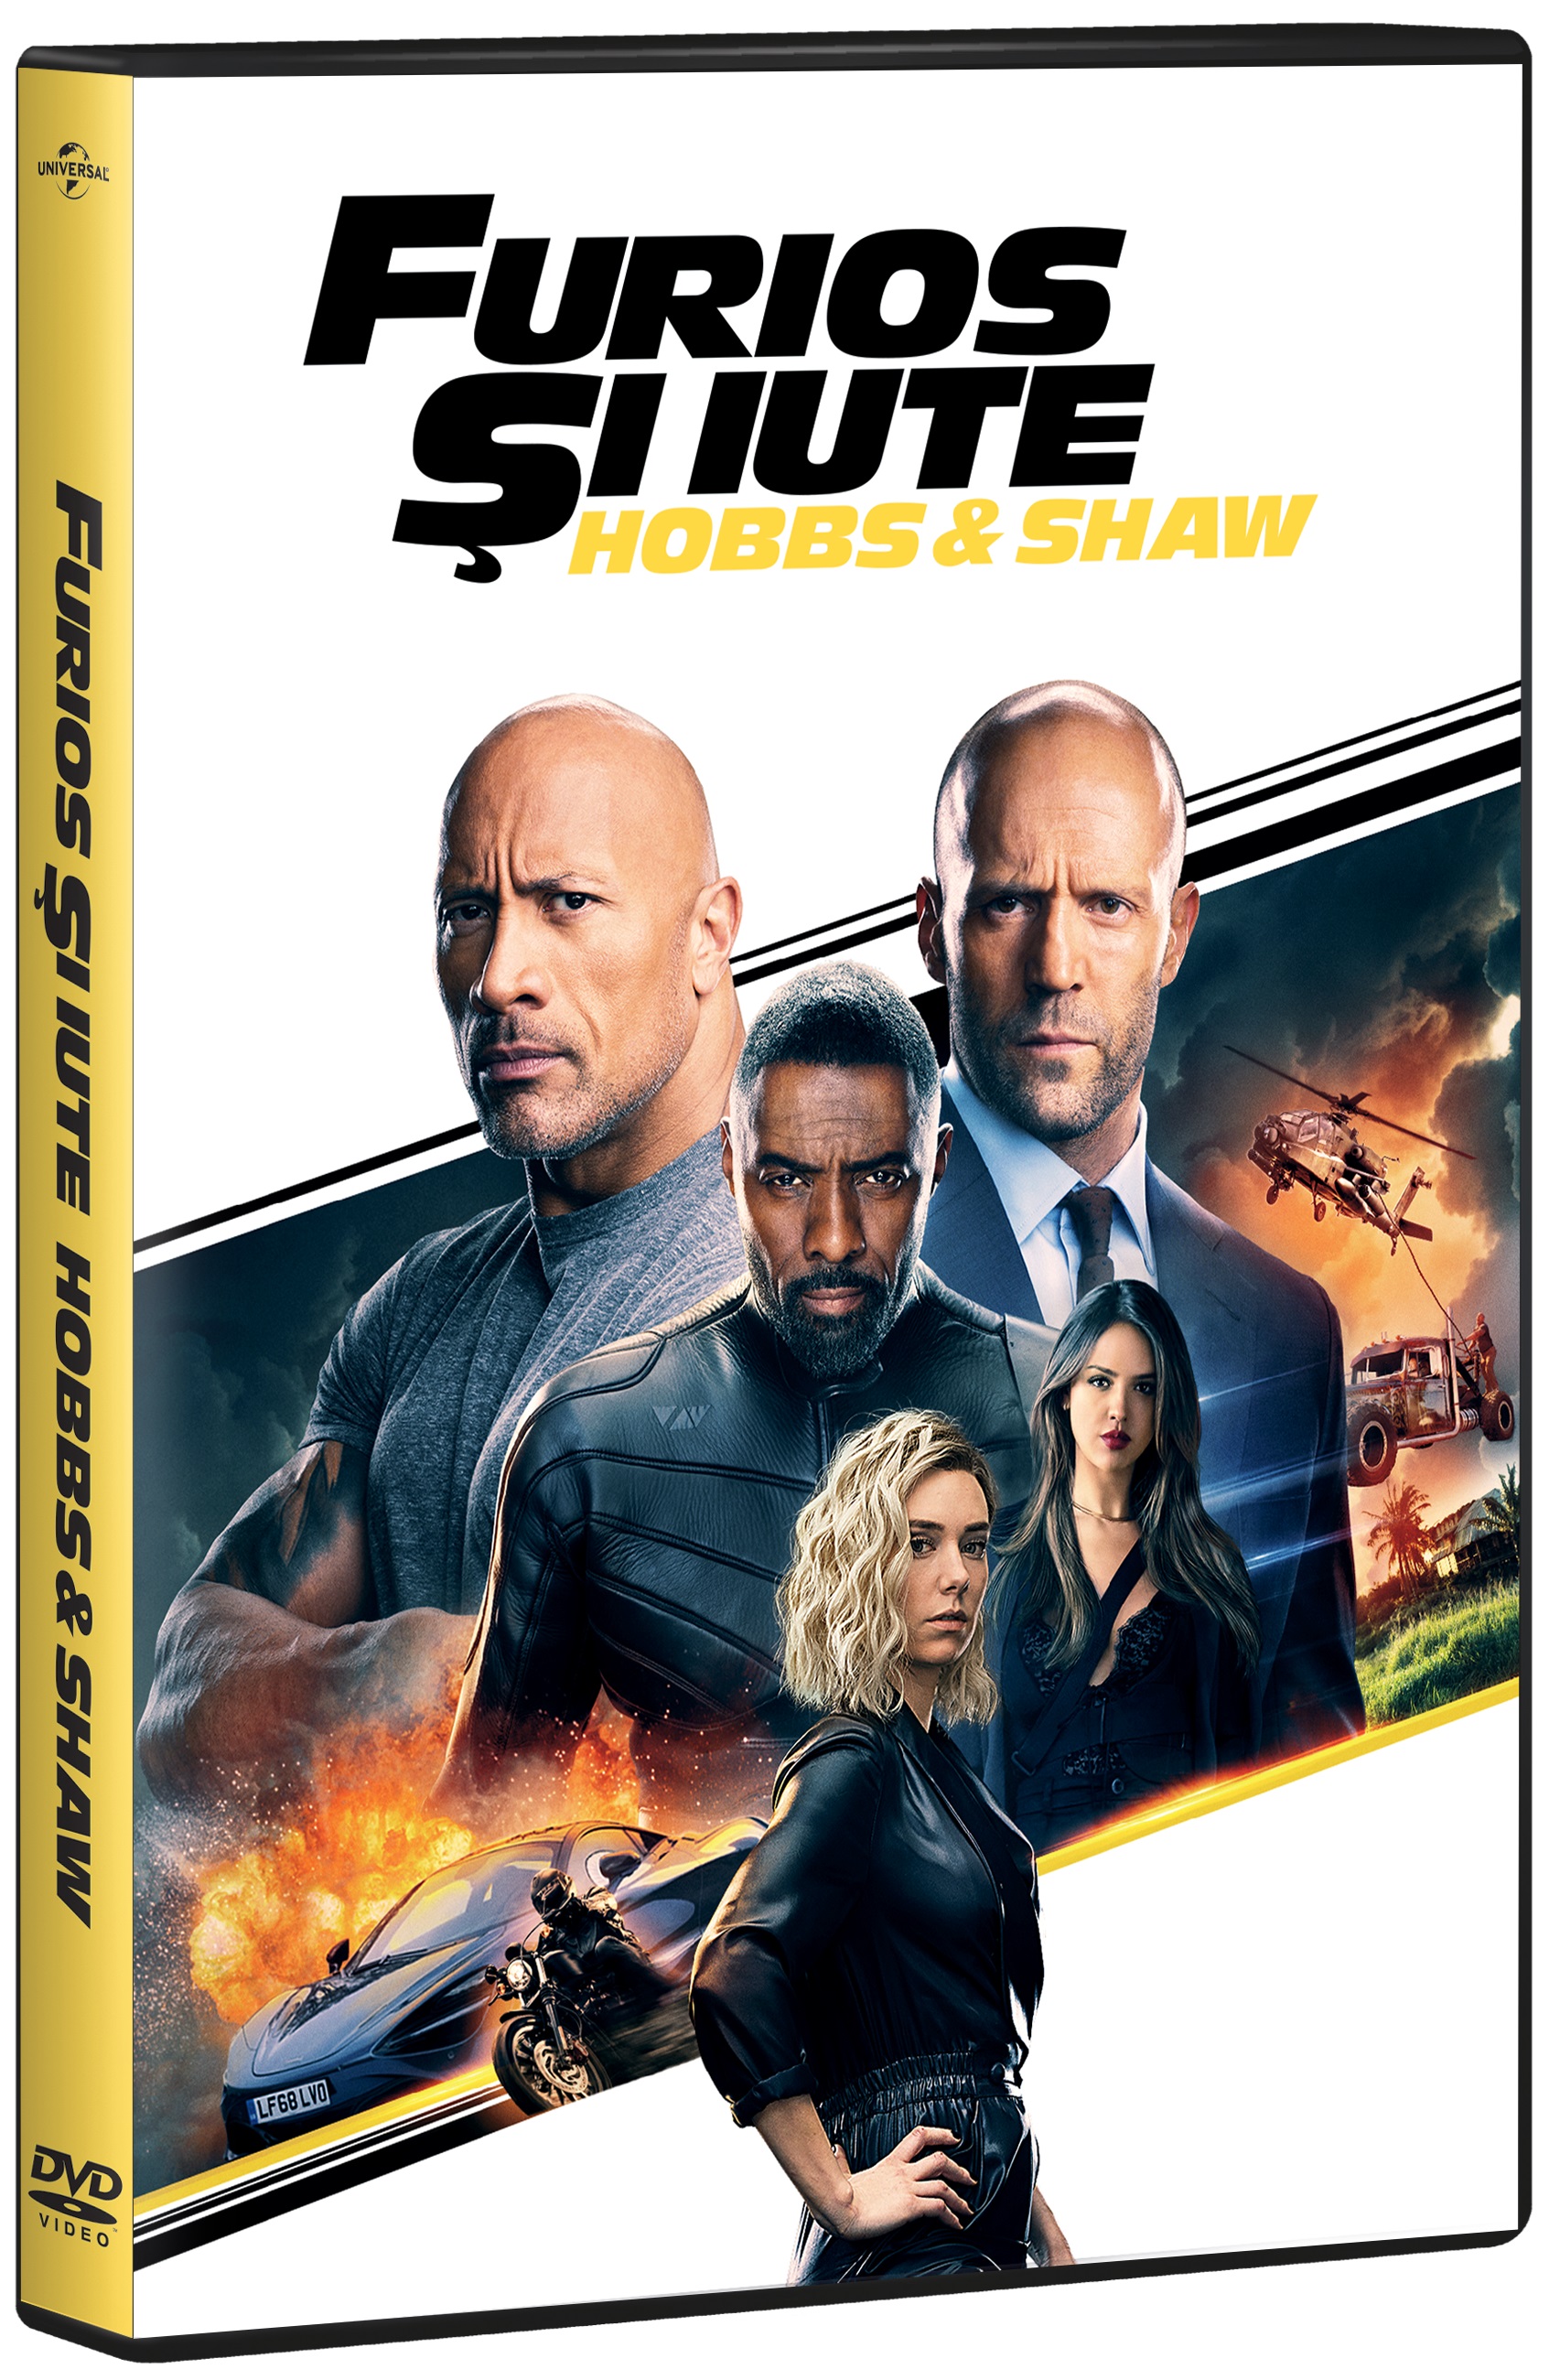 Traditionel Monument Det Furios si iute: Hobbs & Shaw / Fast & Furious Presents: Hobbs & Shaw -  David Leitch